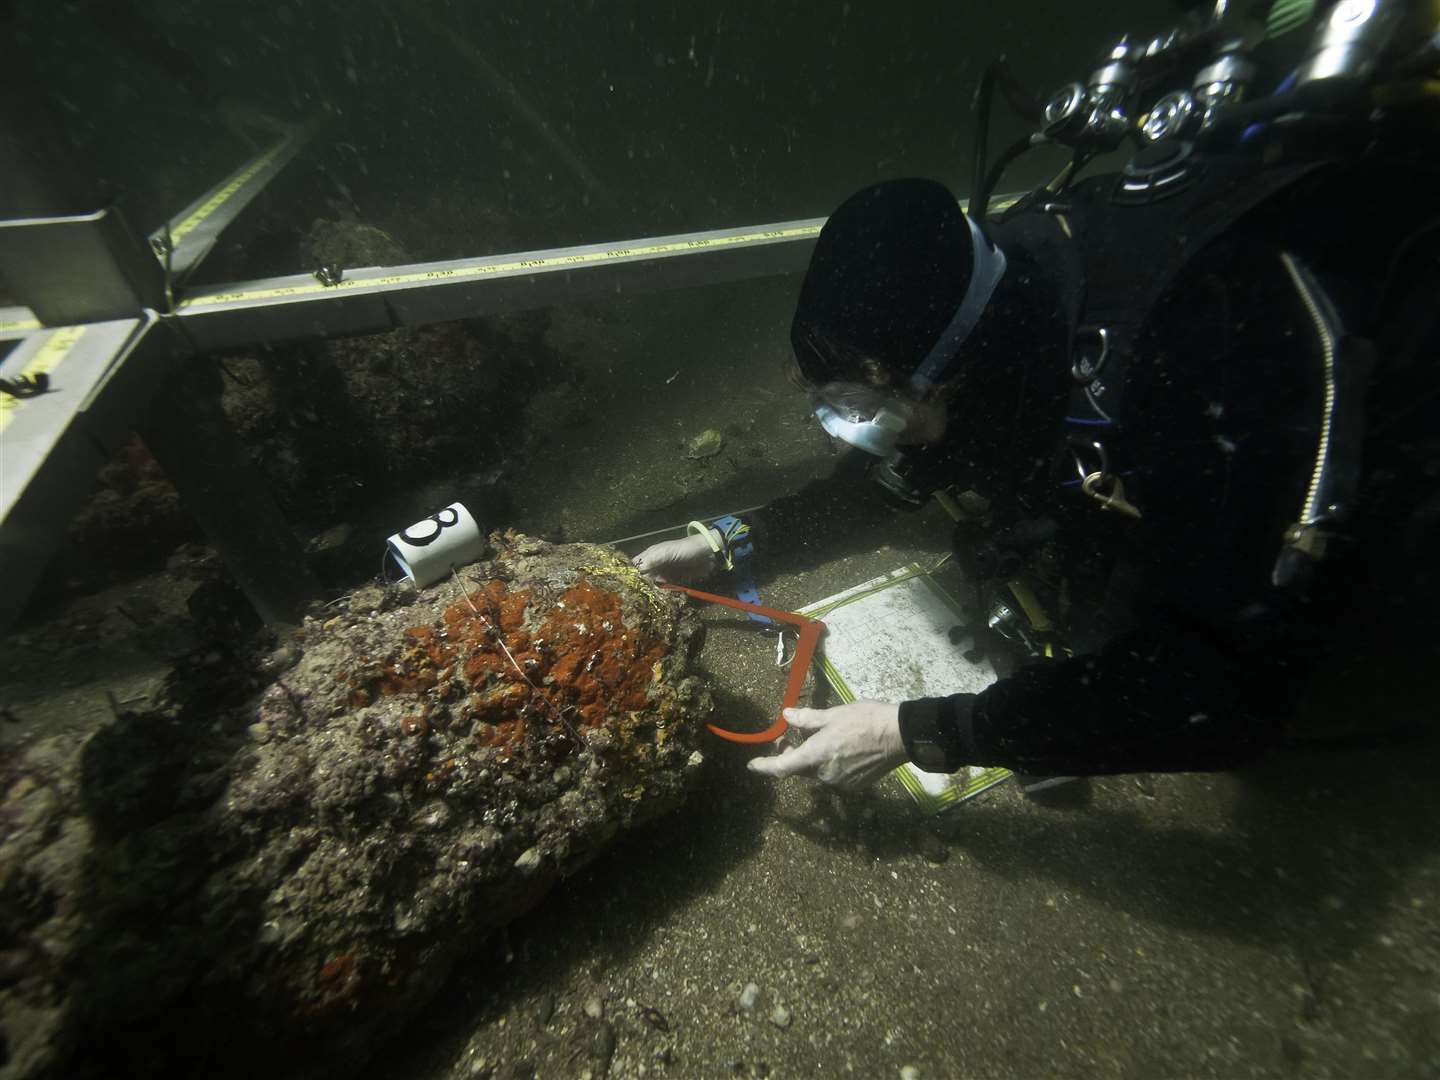 Jane Maddocks measuring items on the sea bed. Picture: Teddy Seguin